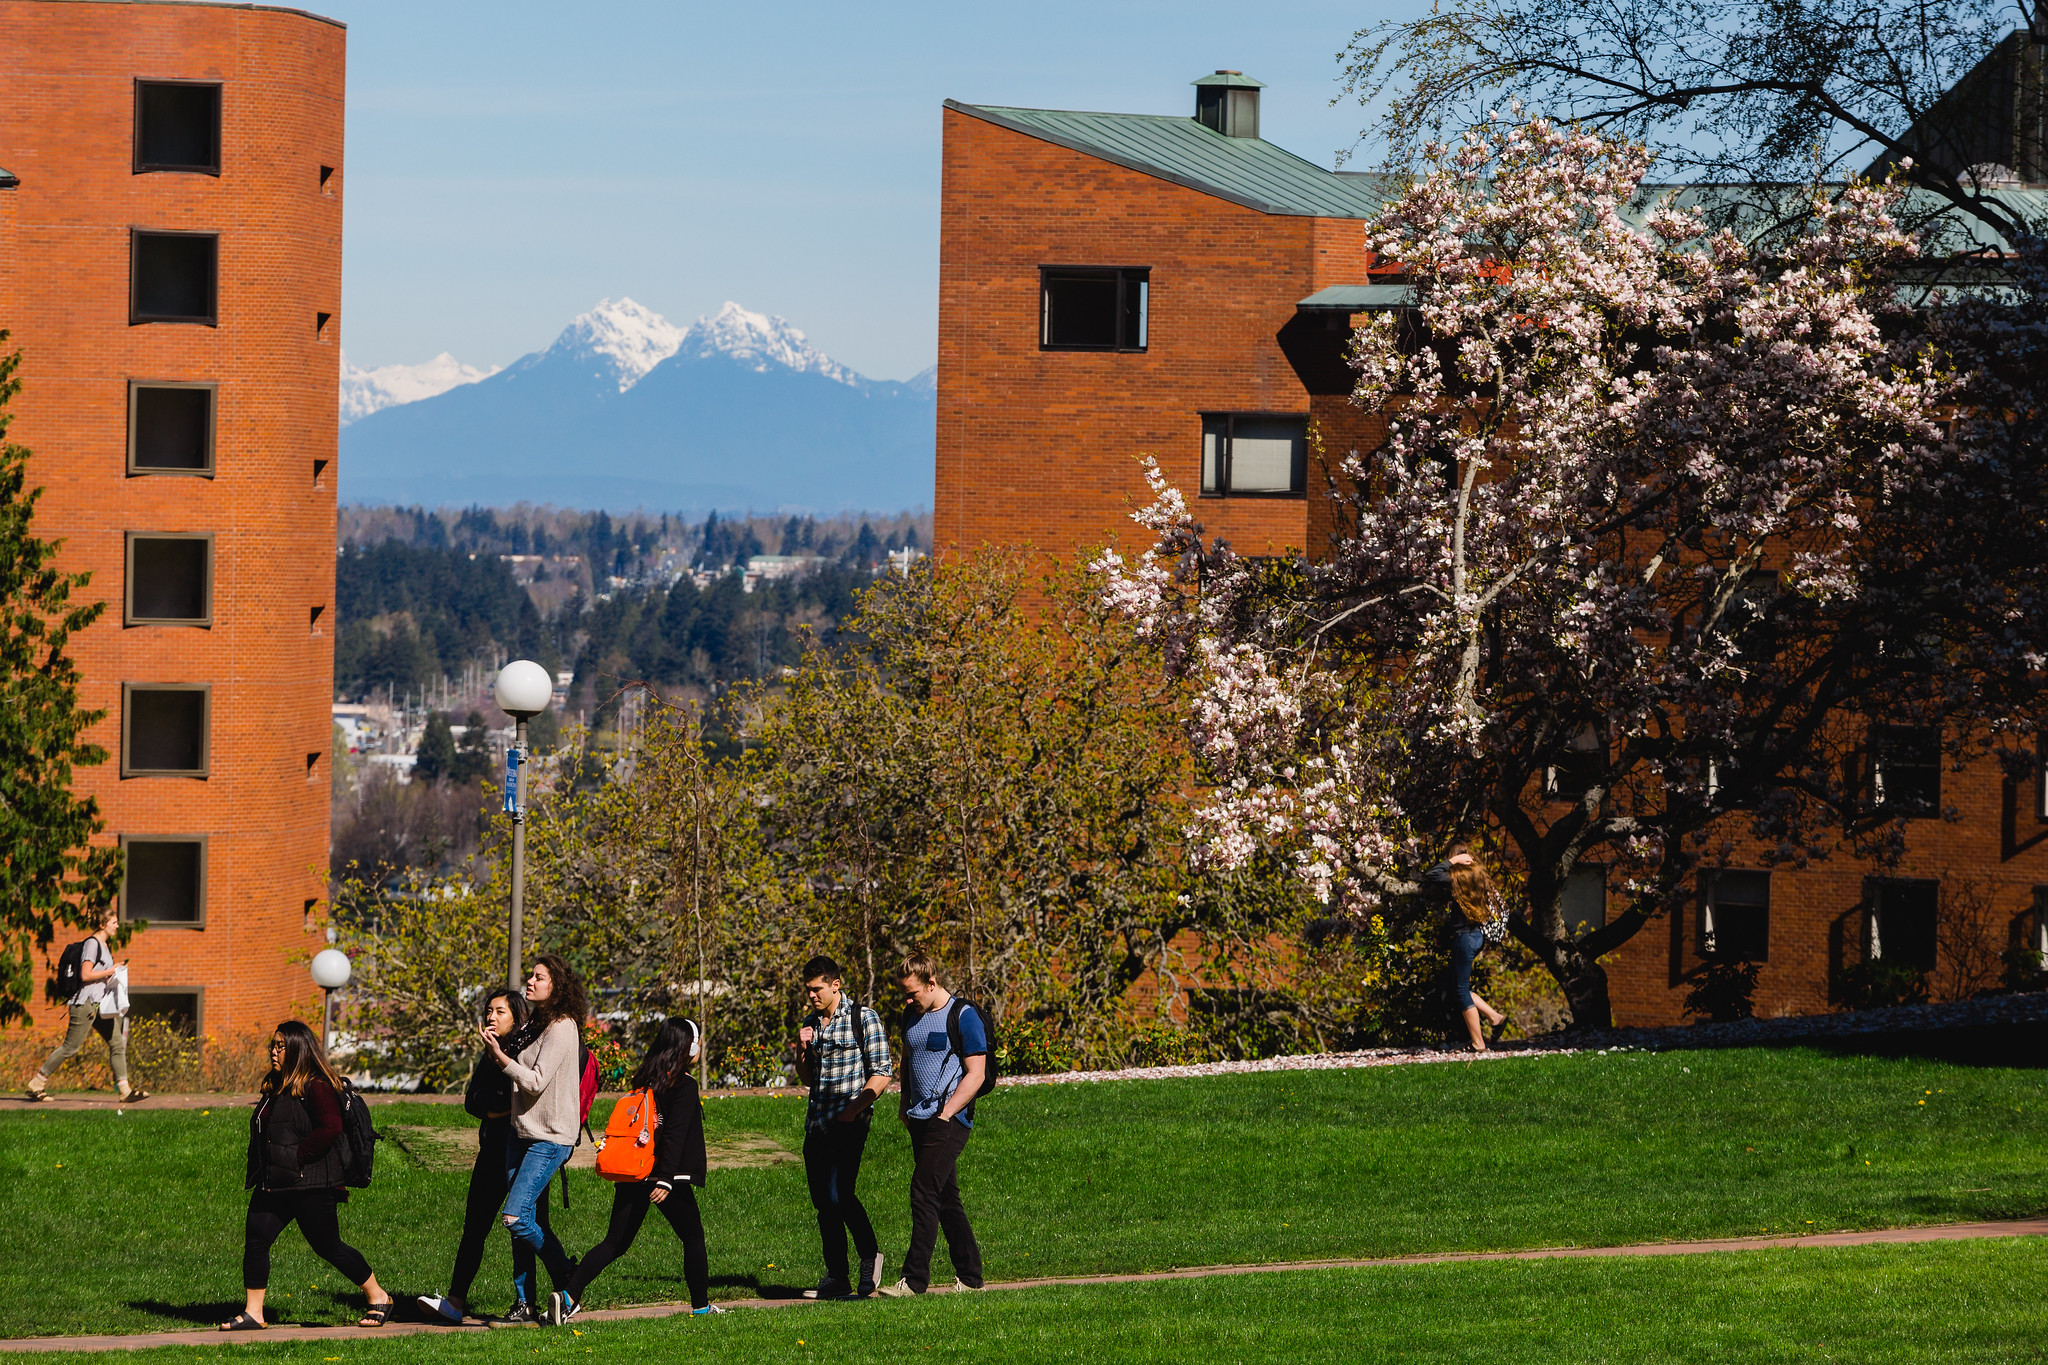 Students walking in front of Nash and Mathes Halls with snow-capped mountains in the background